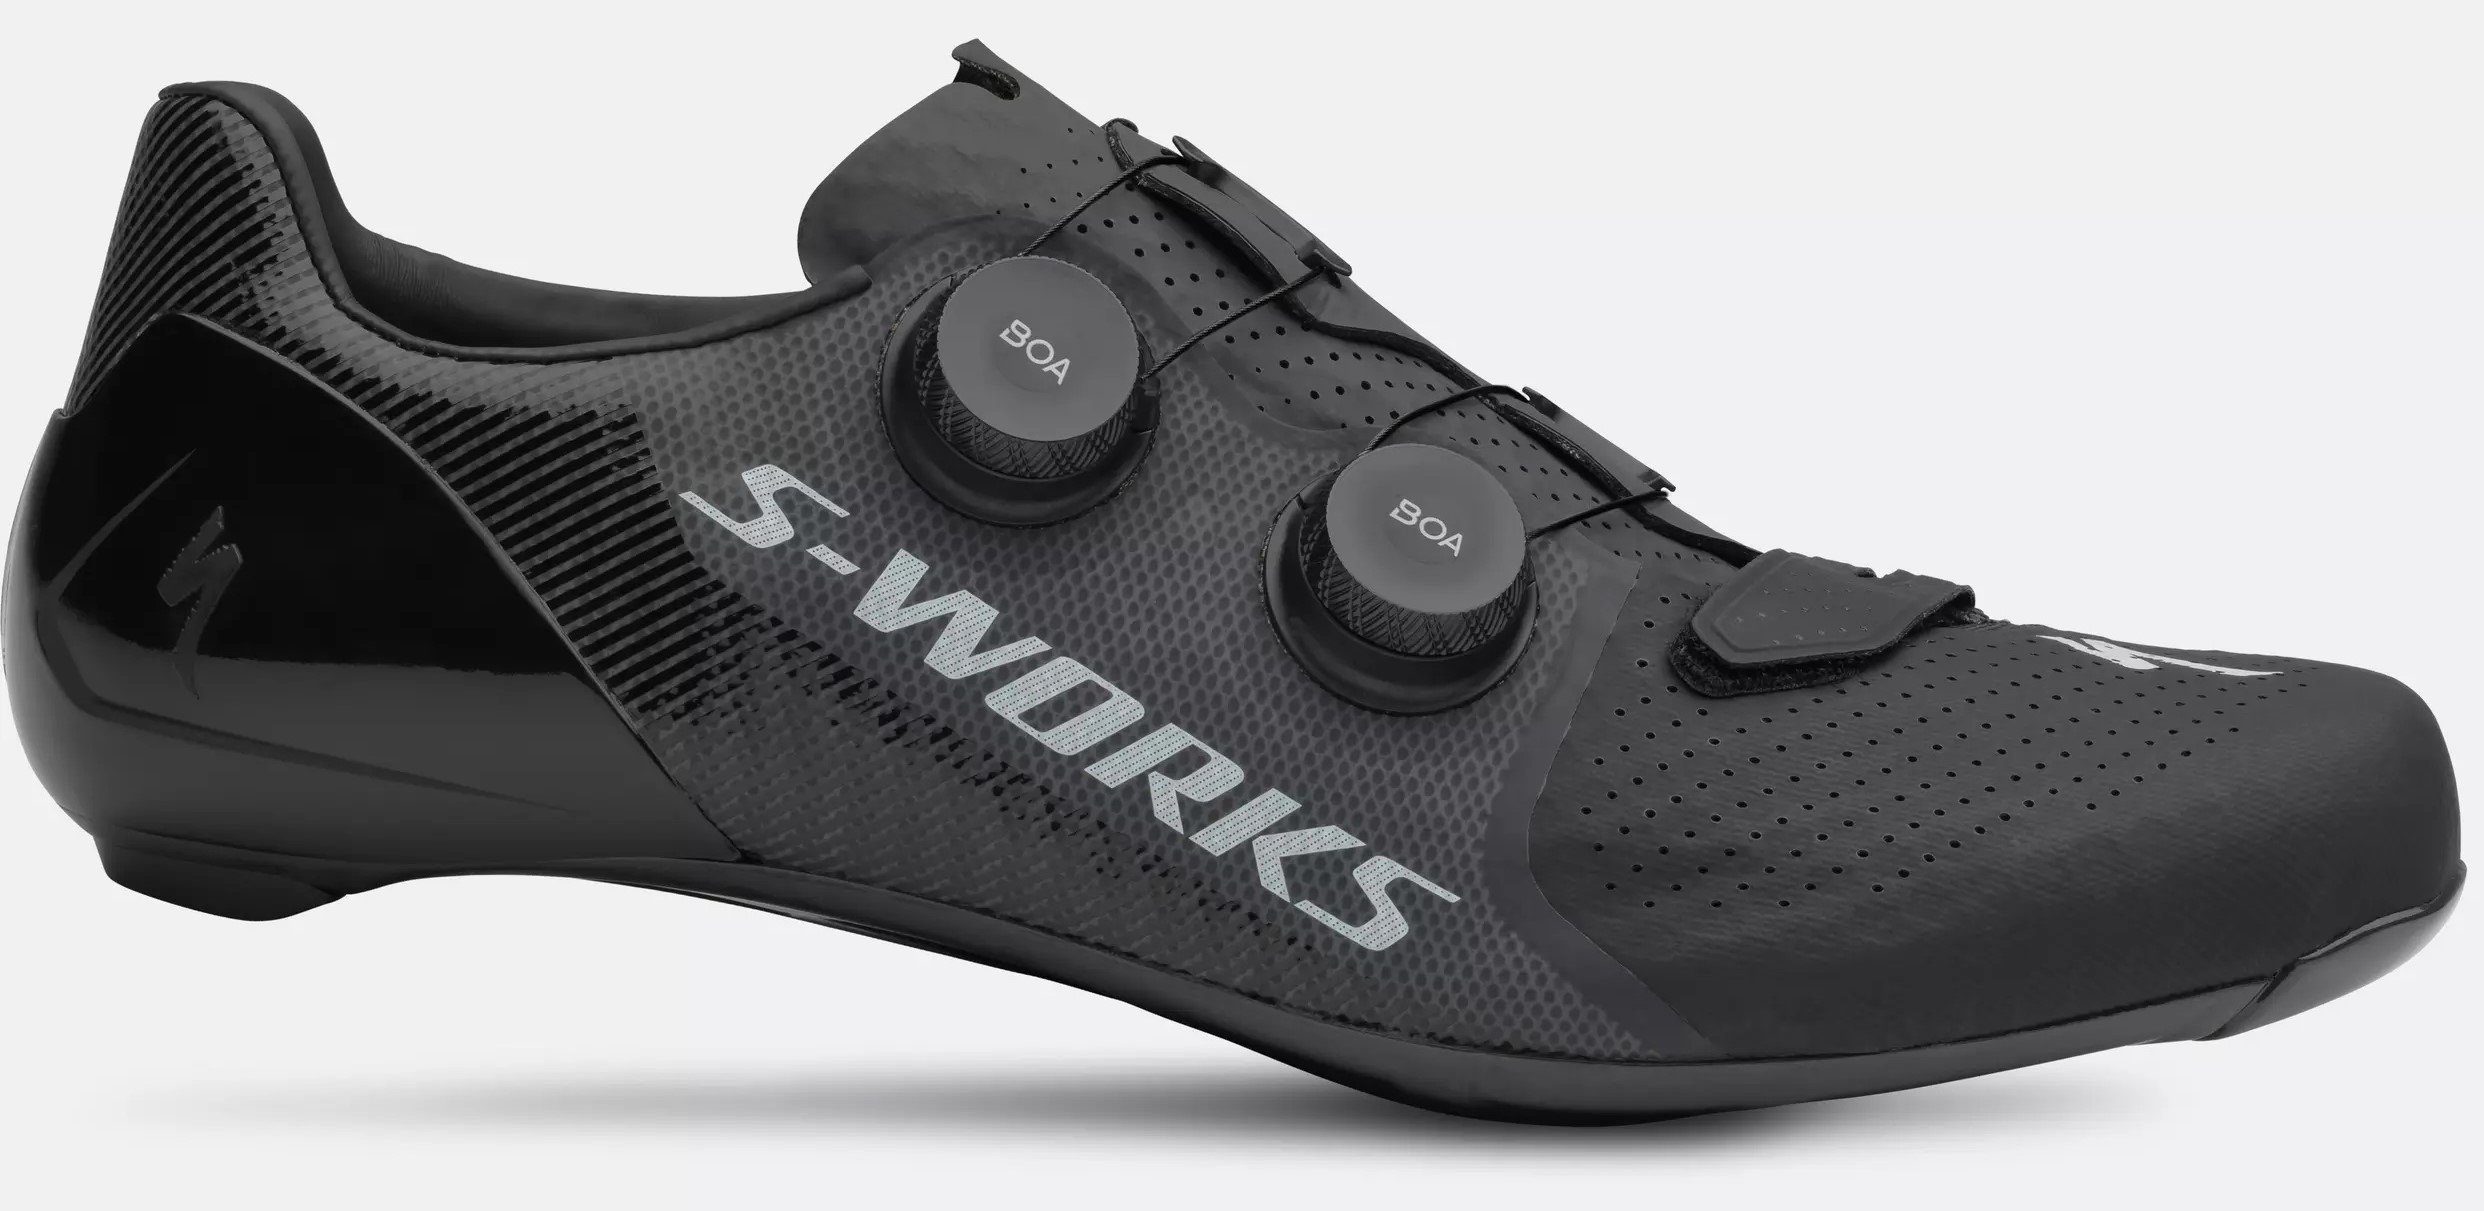 Specialized S-Works 7 Road Shoe